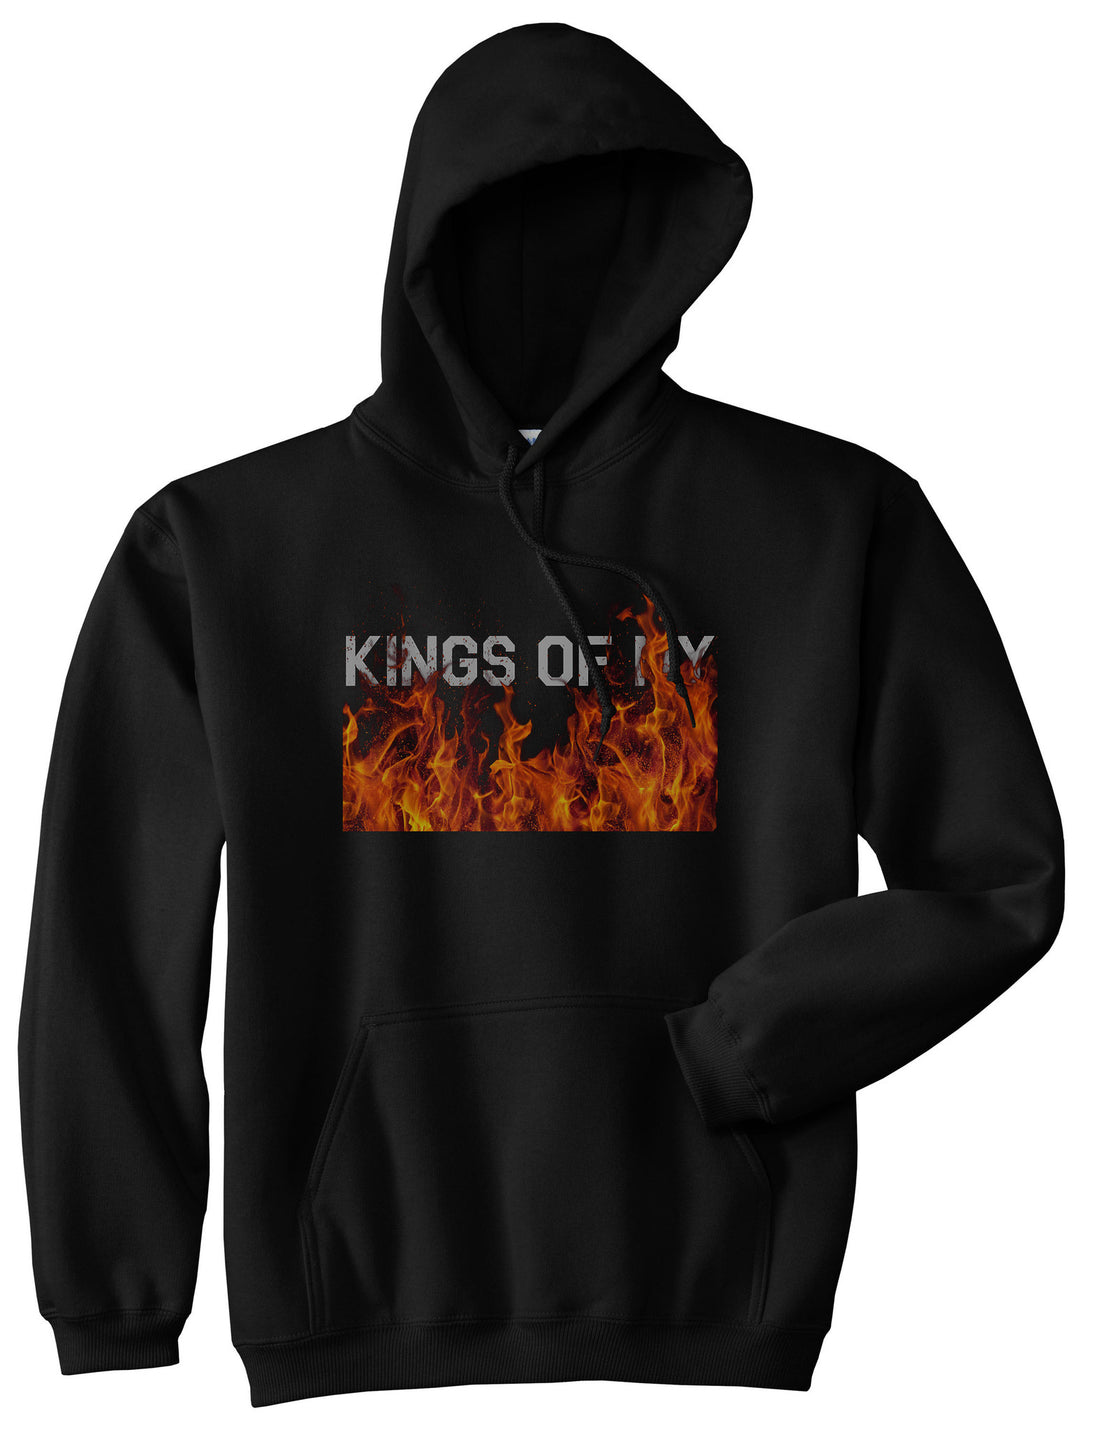 Rising From The Flames Pullover Hoodie in Black